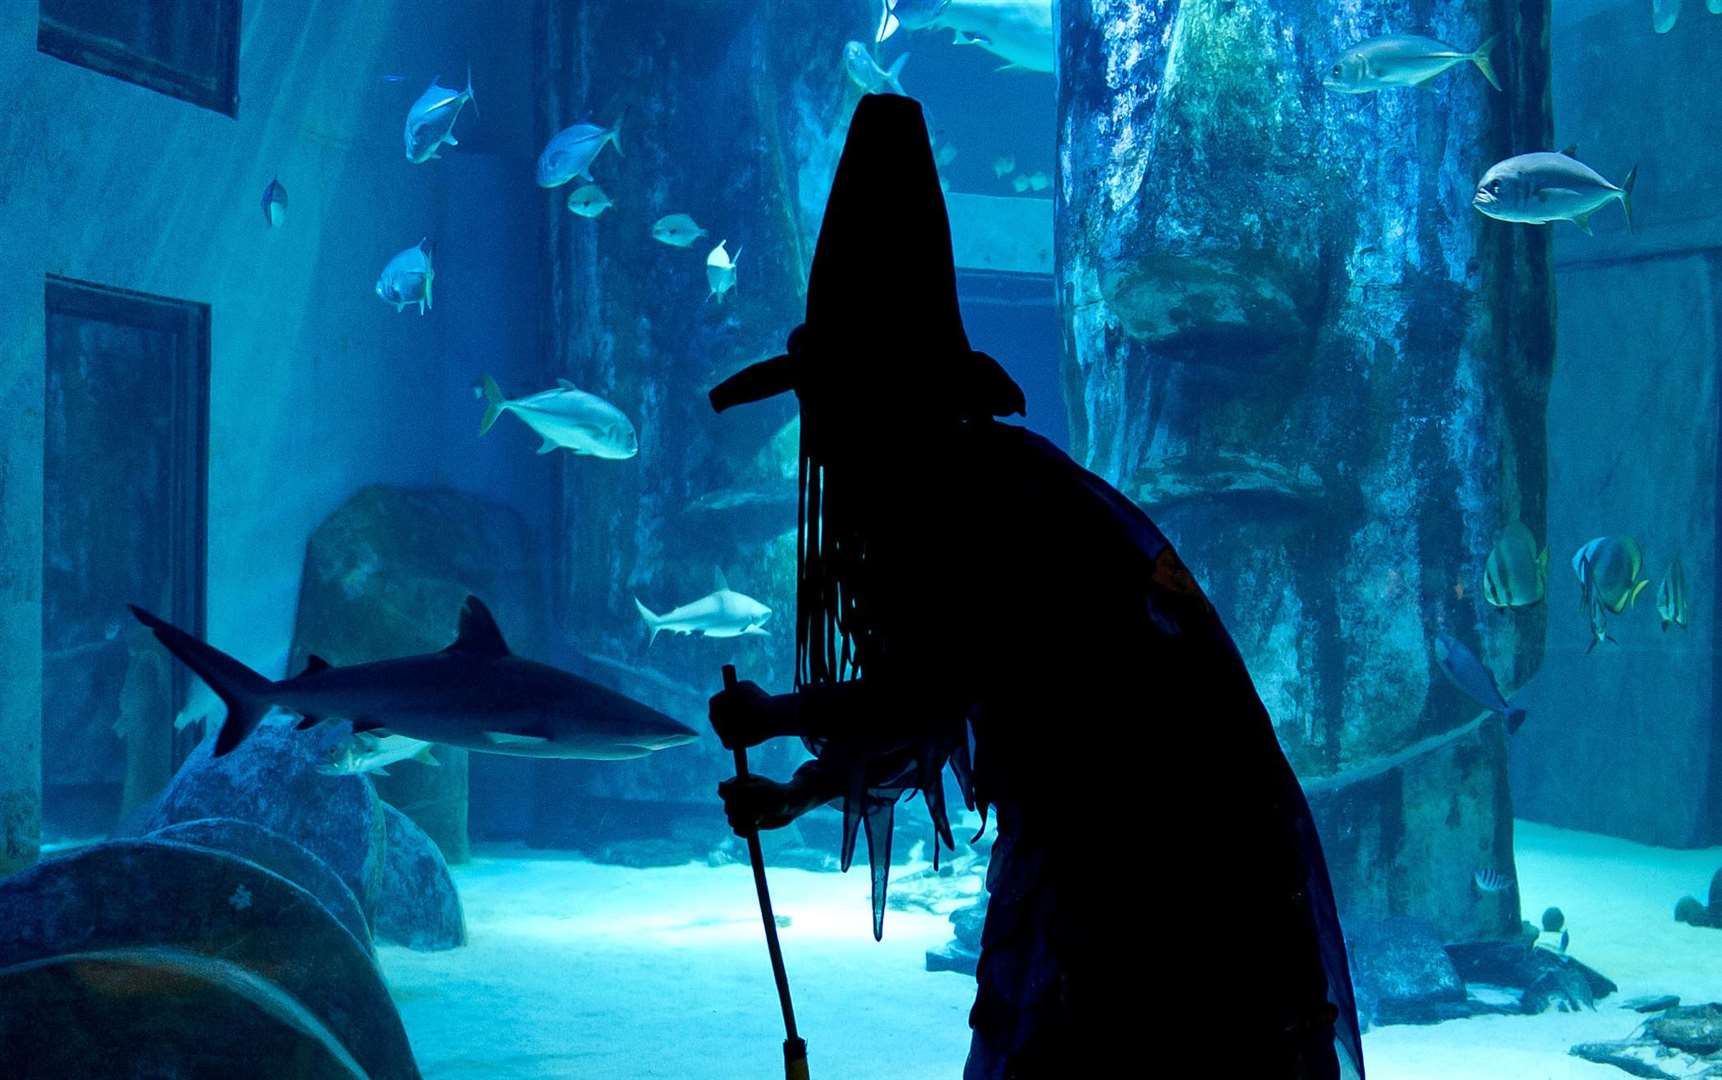 What do you fear most; sharks or witches? Visit SEA LIFE London Aquarium this Halloween and find out!